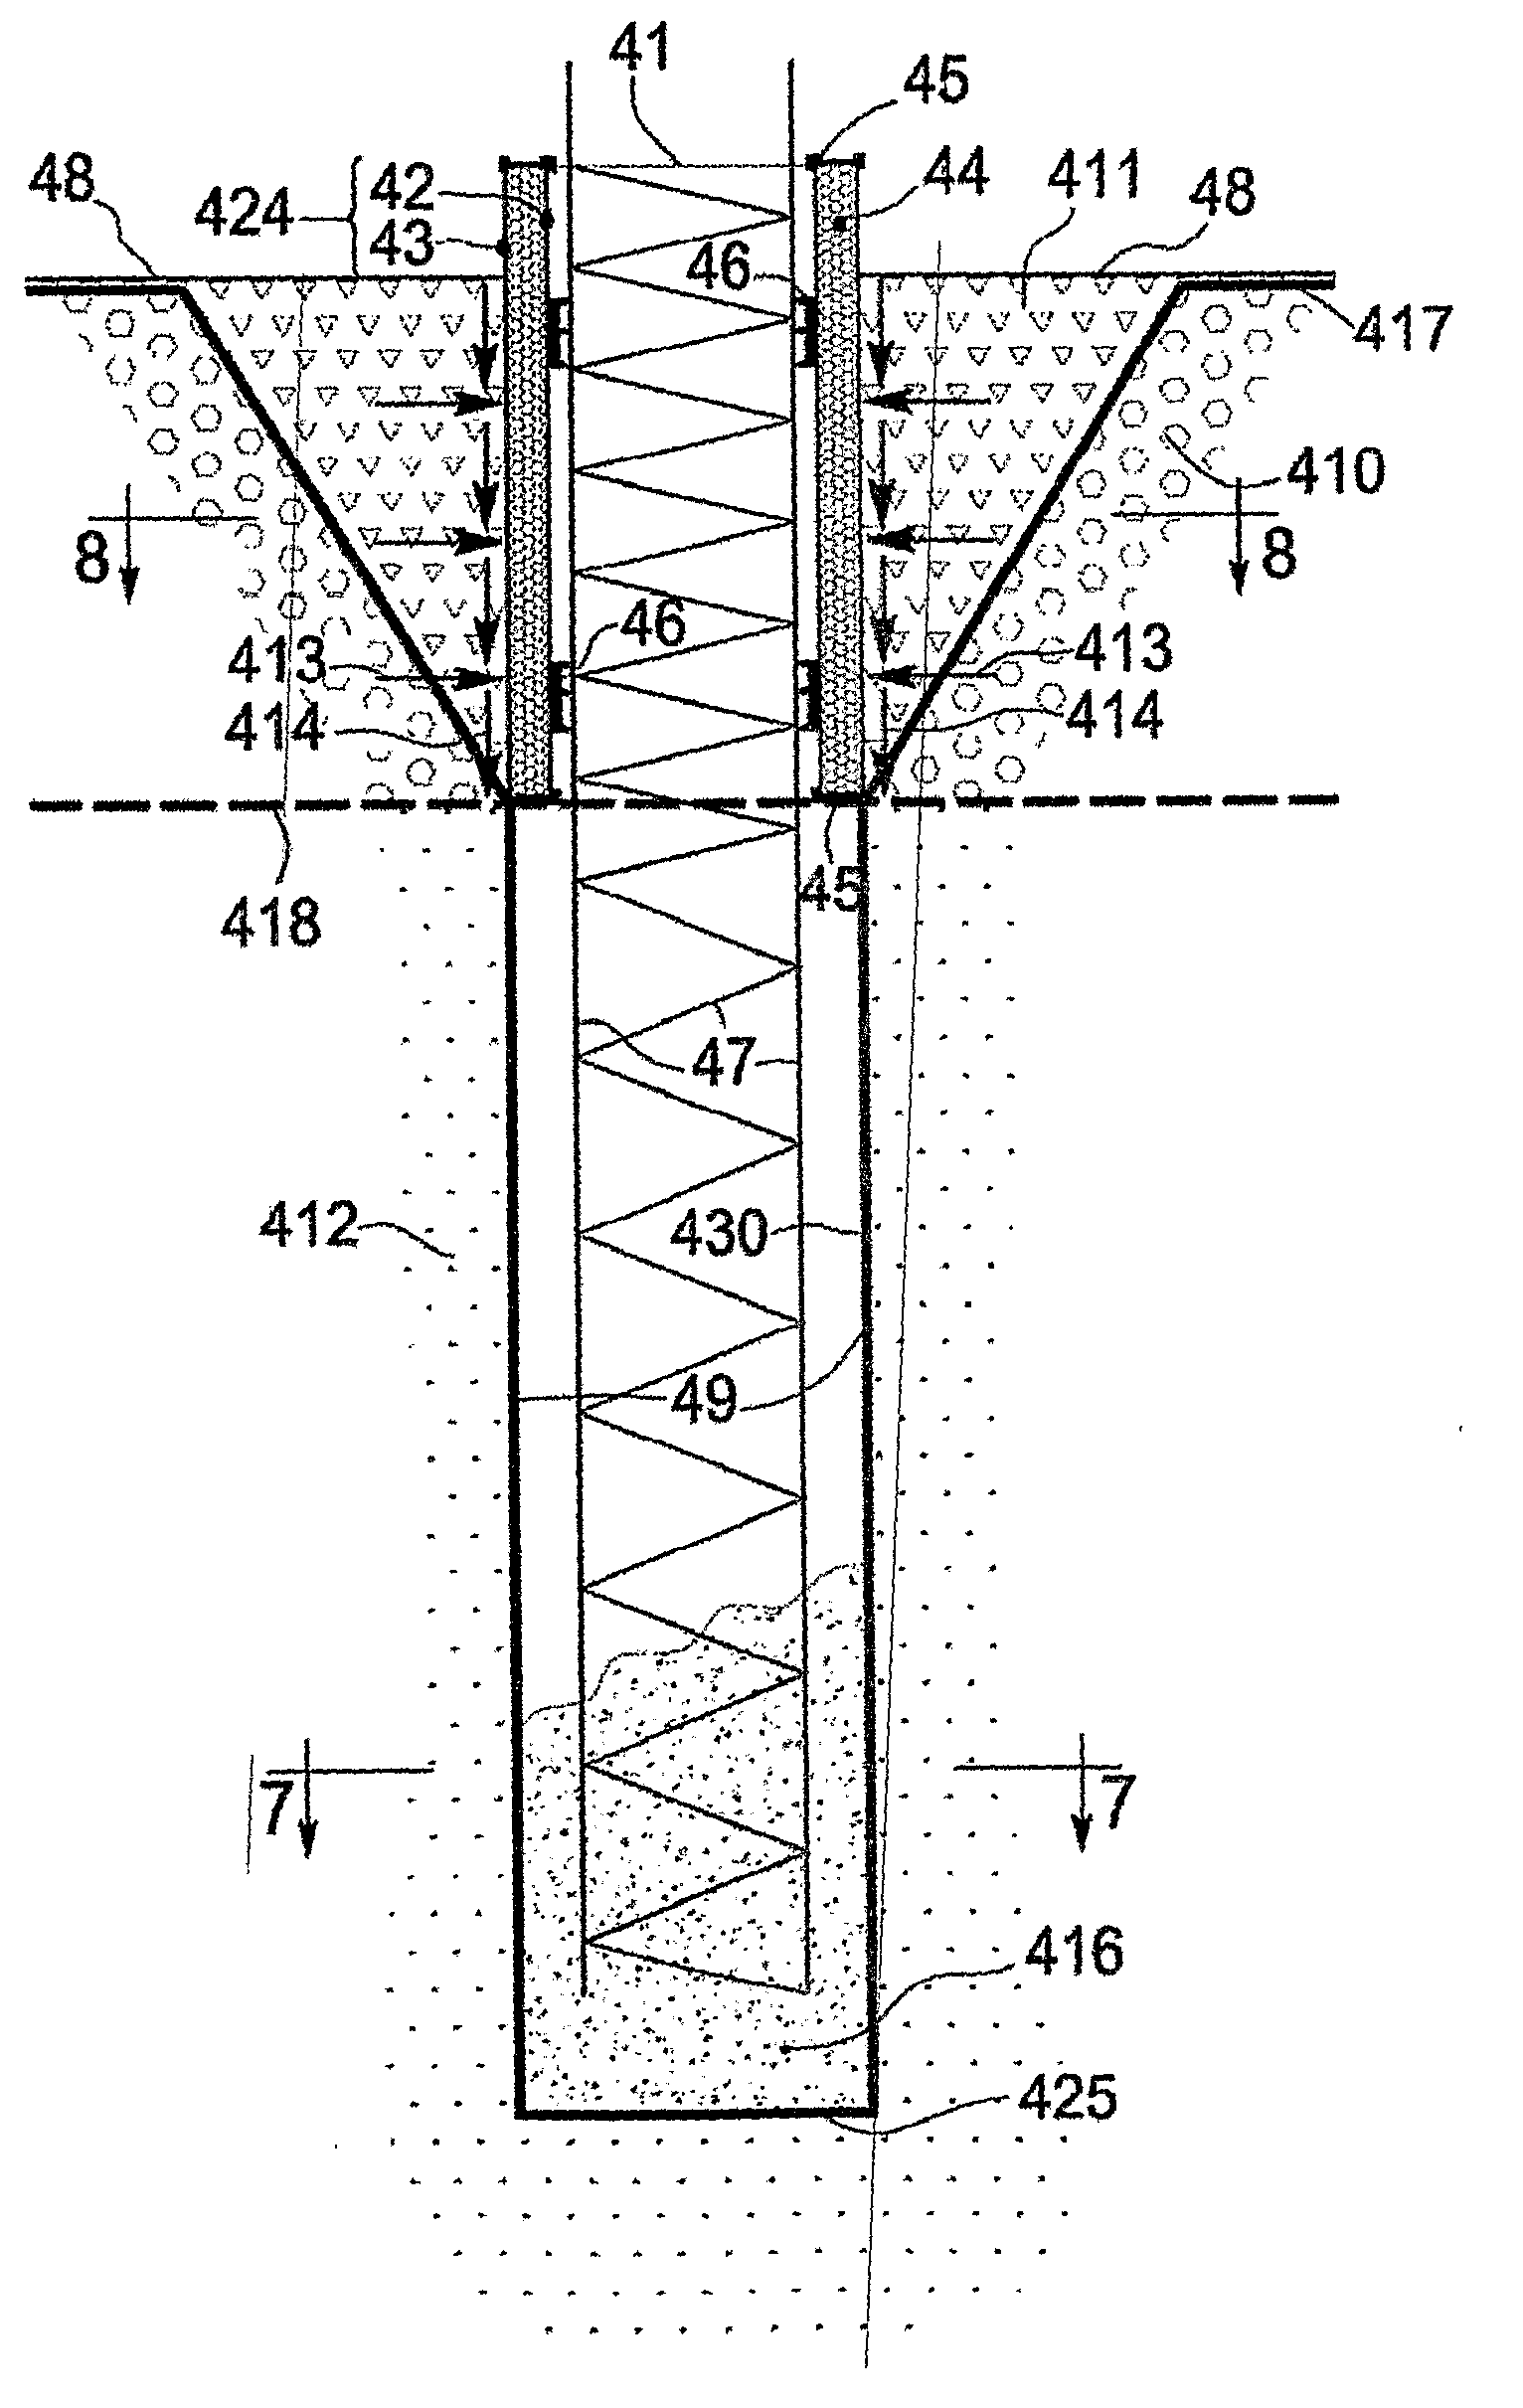 Device and Method for Improved Pile Casting